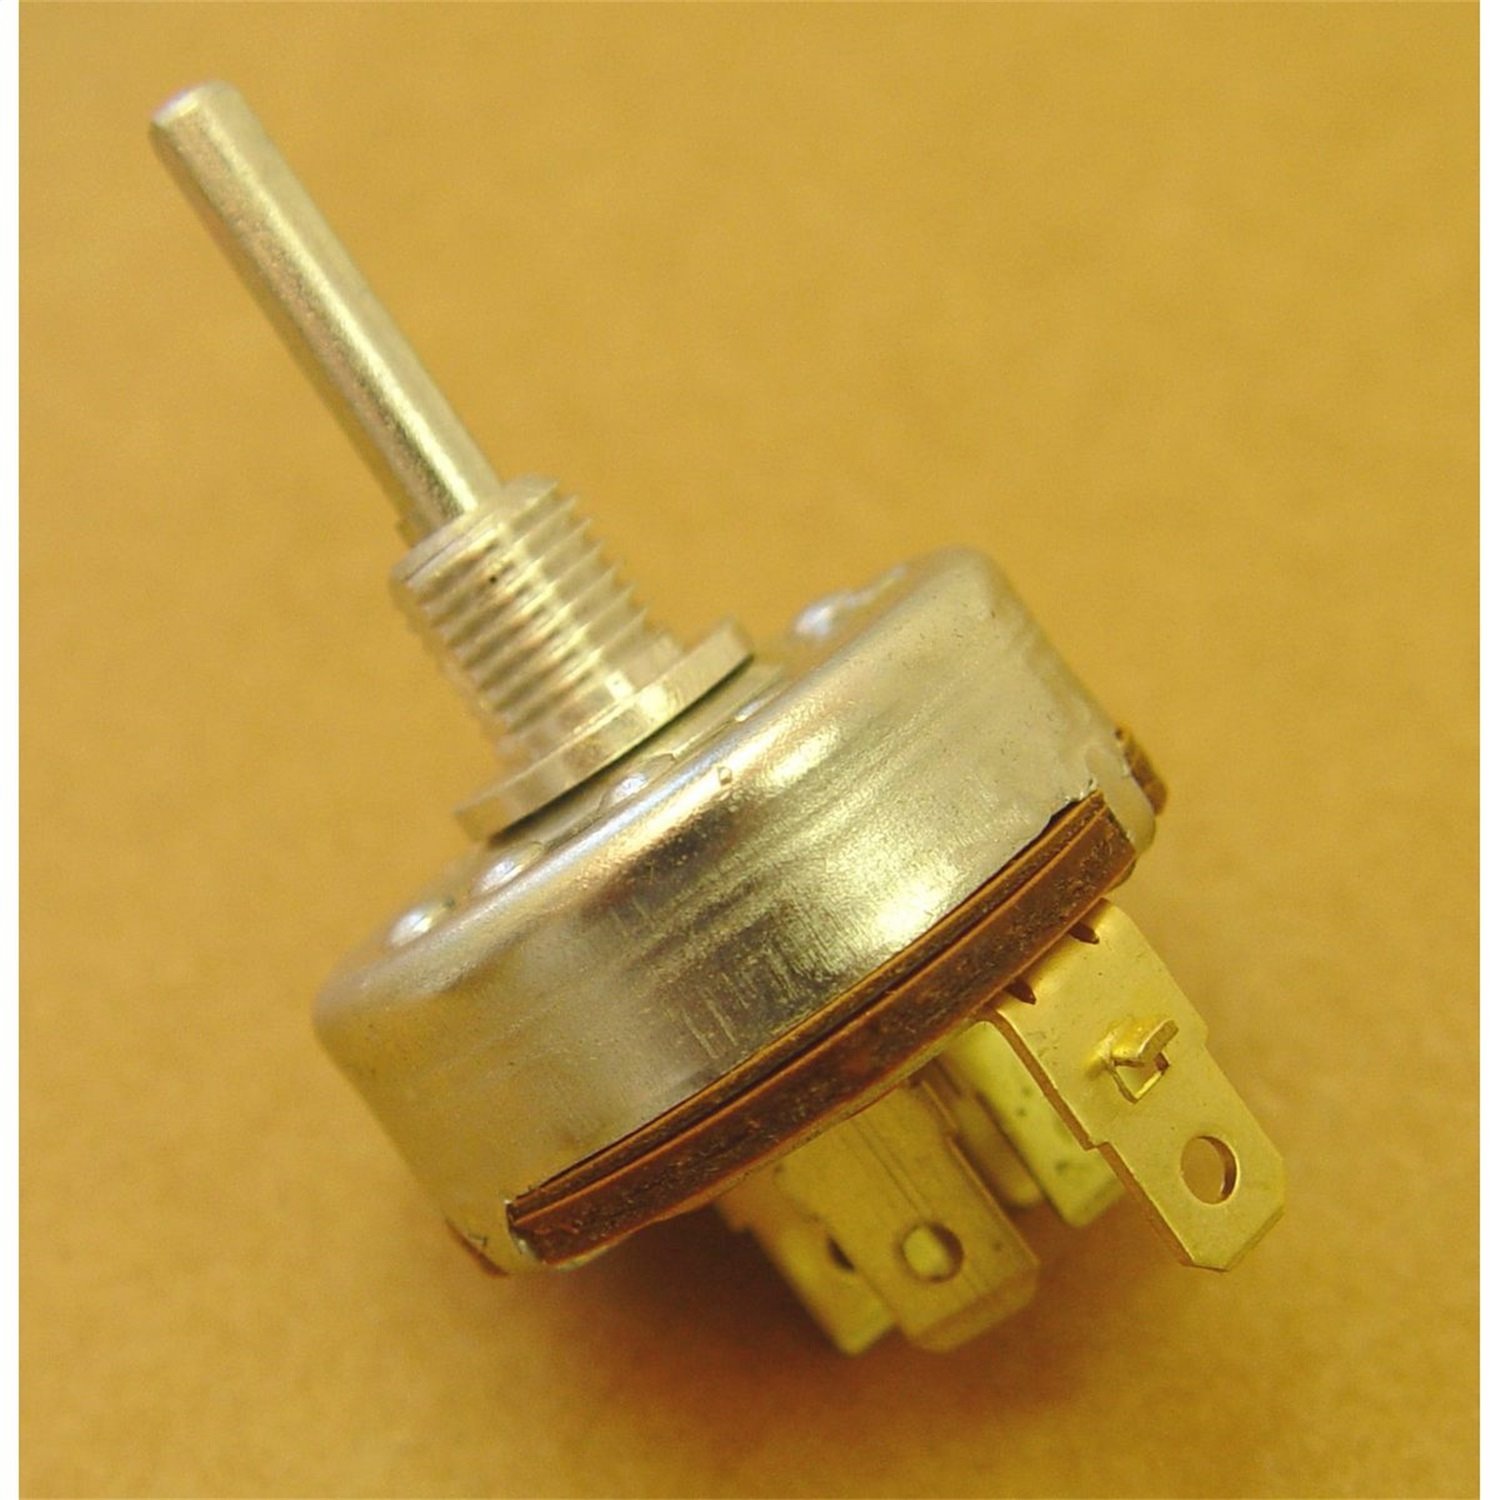 This windshield wiper switch from Omix-ADA fits 68-82 Jeep CJ models with a 3-wire motor.